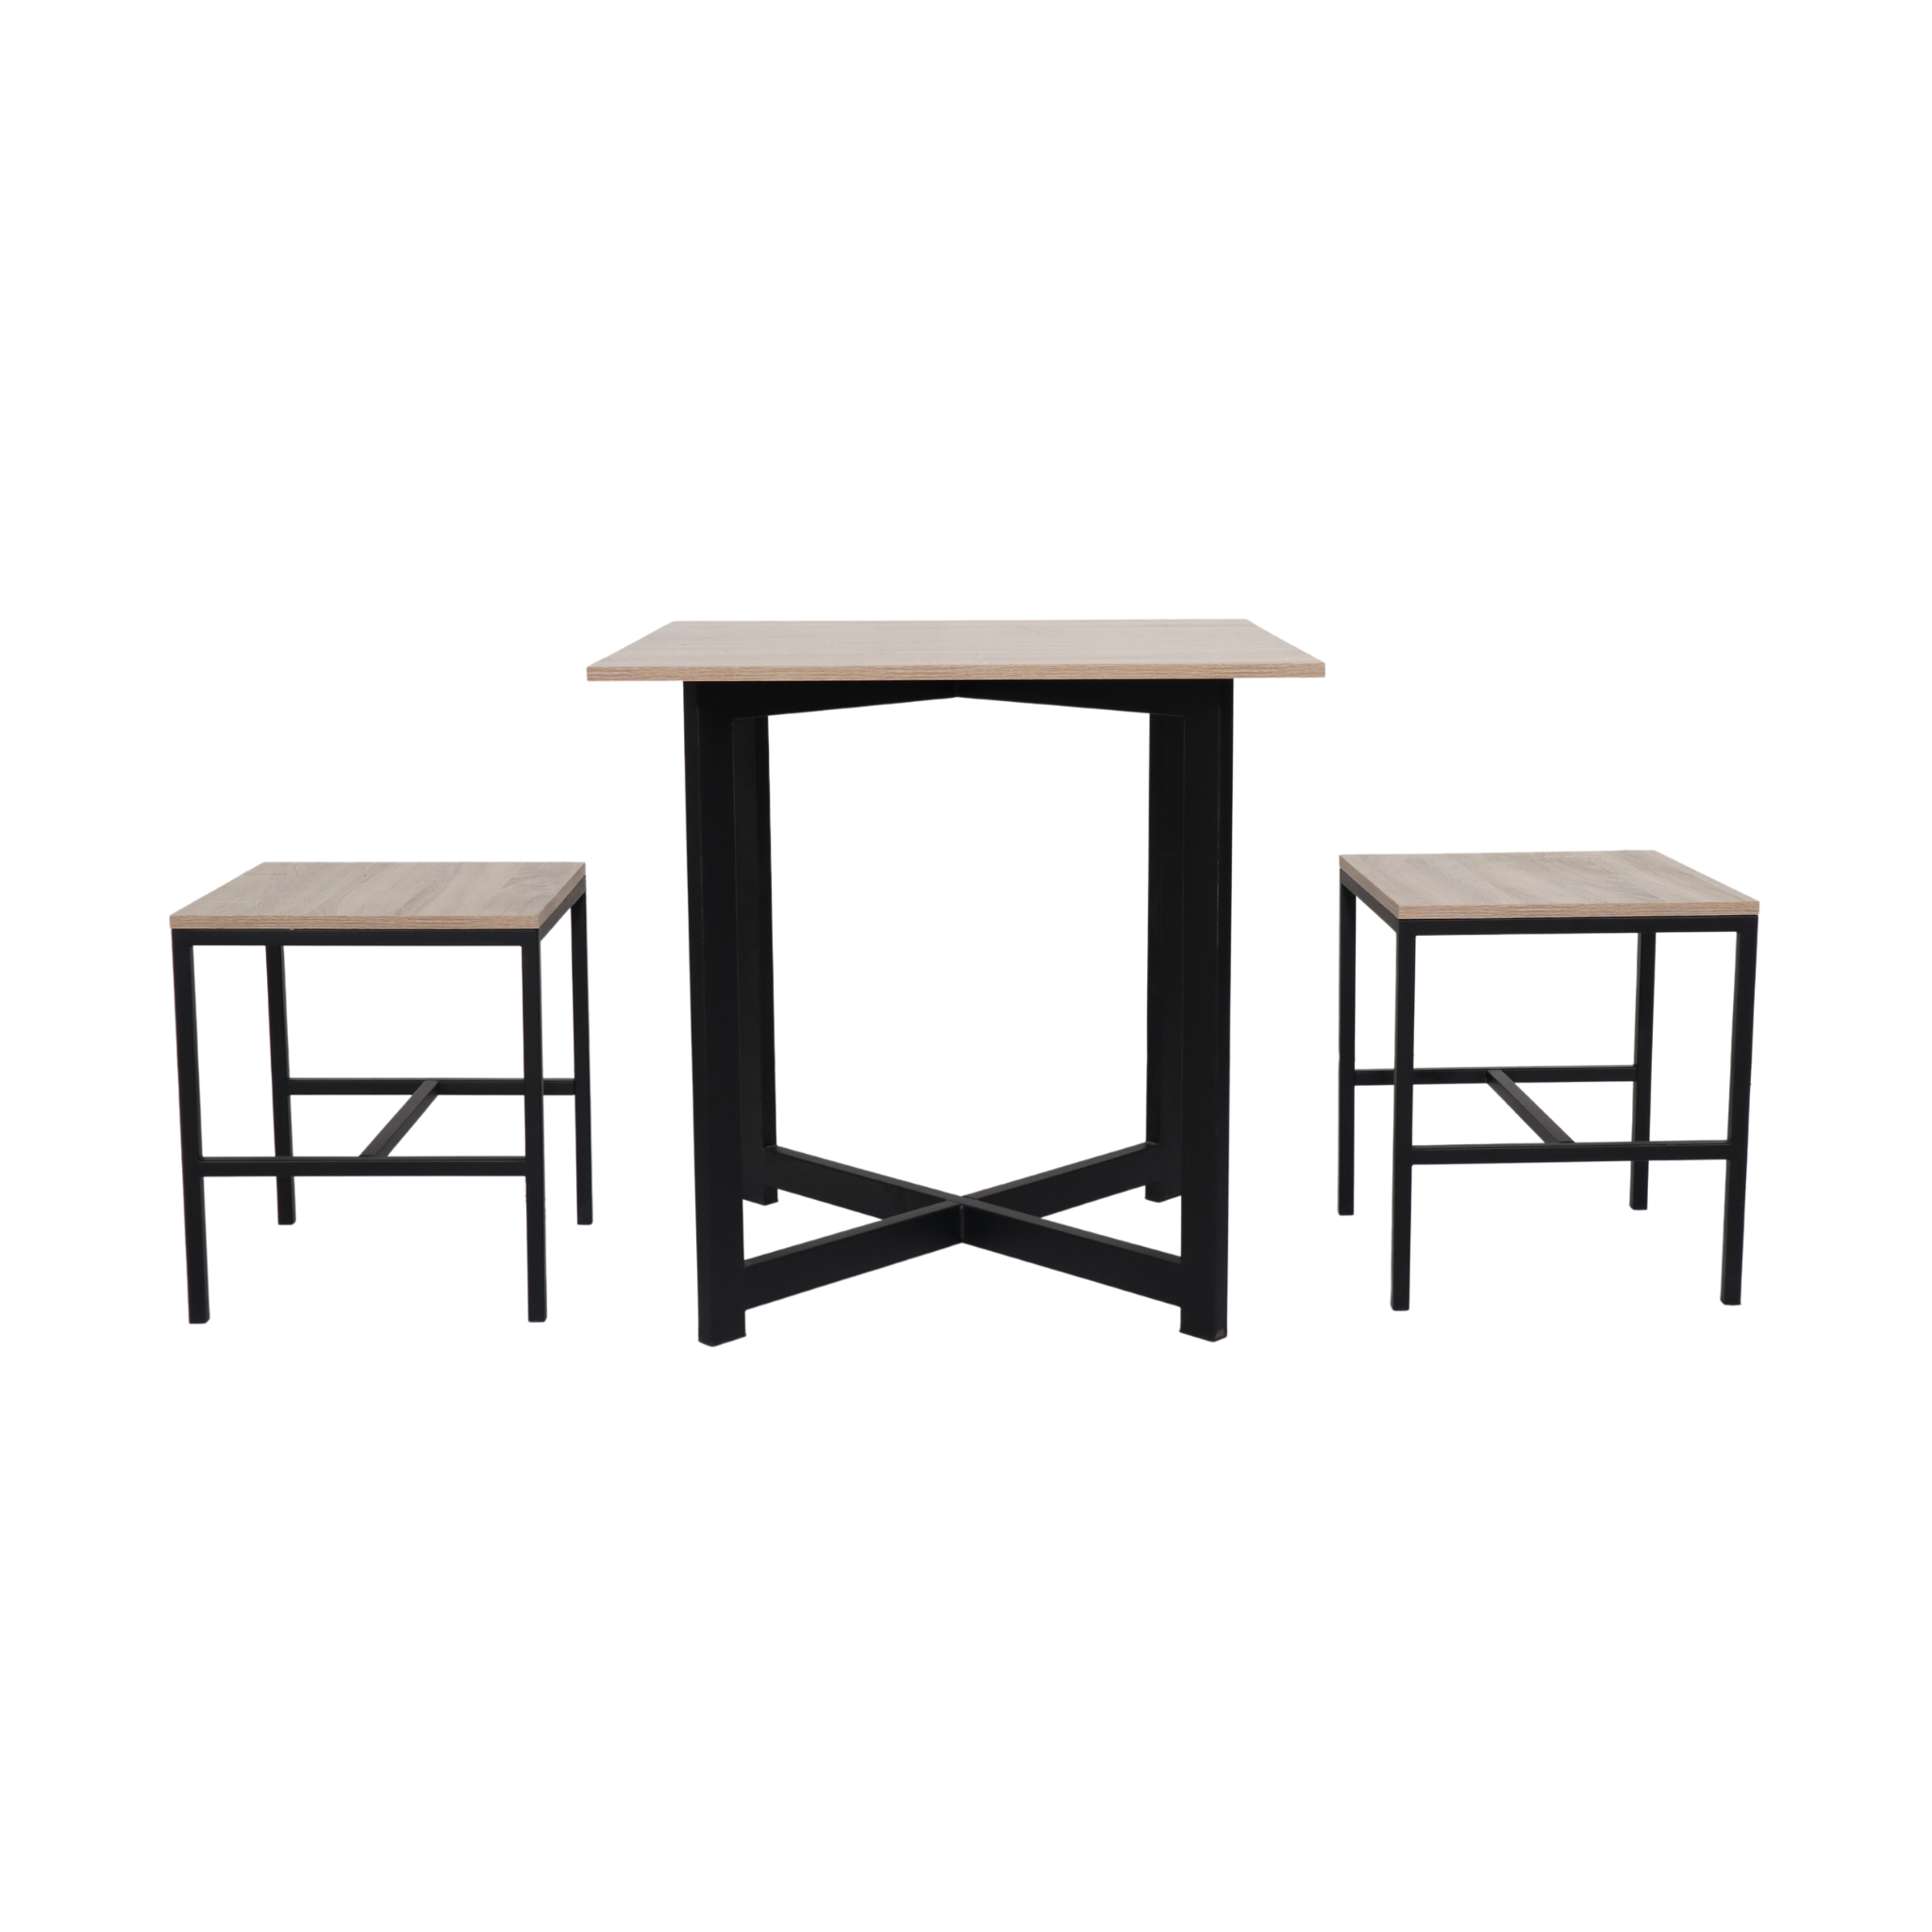 PAULO 2 Seater Dining Table Set AF Home